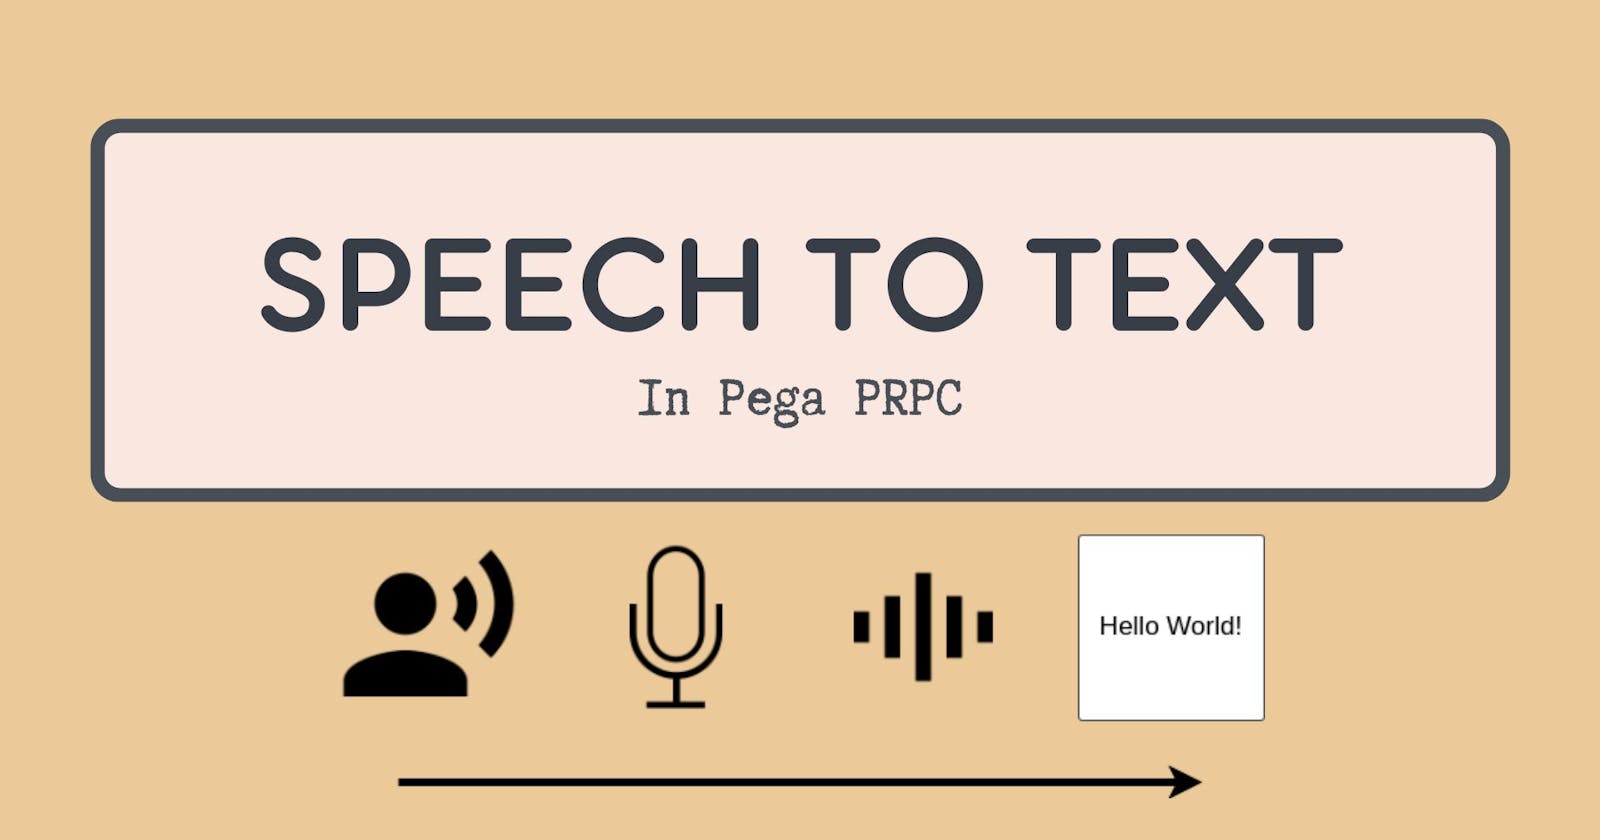 Speech to text in Pega